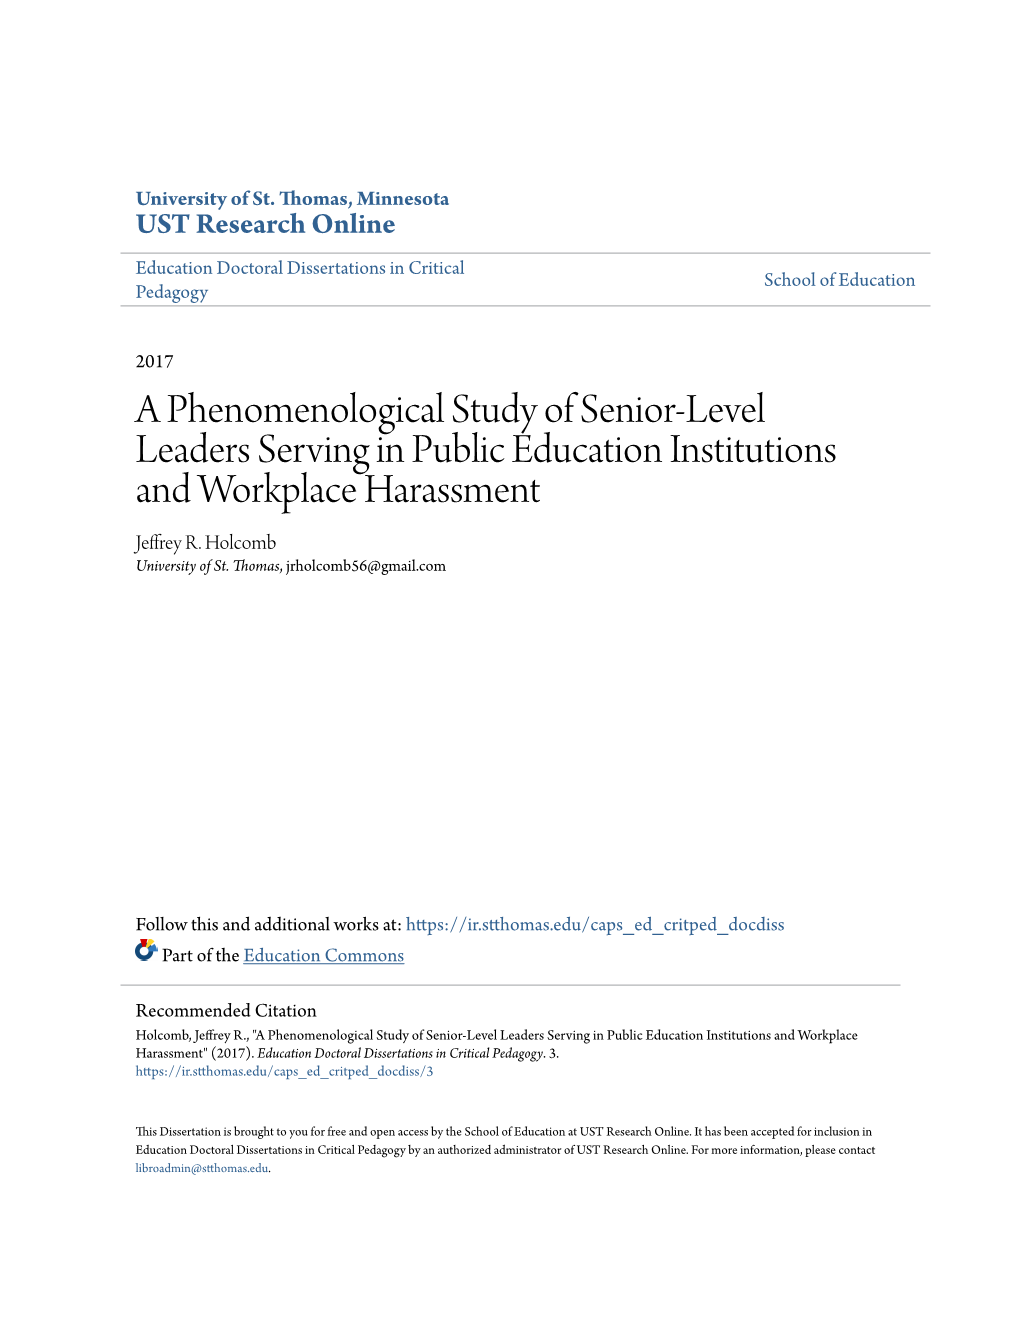 A Phenomenological Study of Senior-Level Leaders Serving in Public Education Institutions and Workplace Harassment Jeffrey R